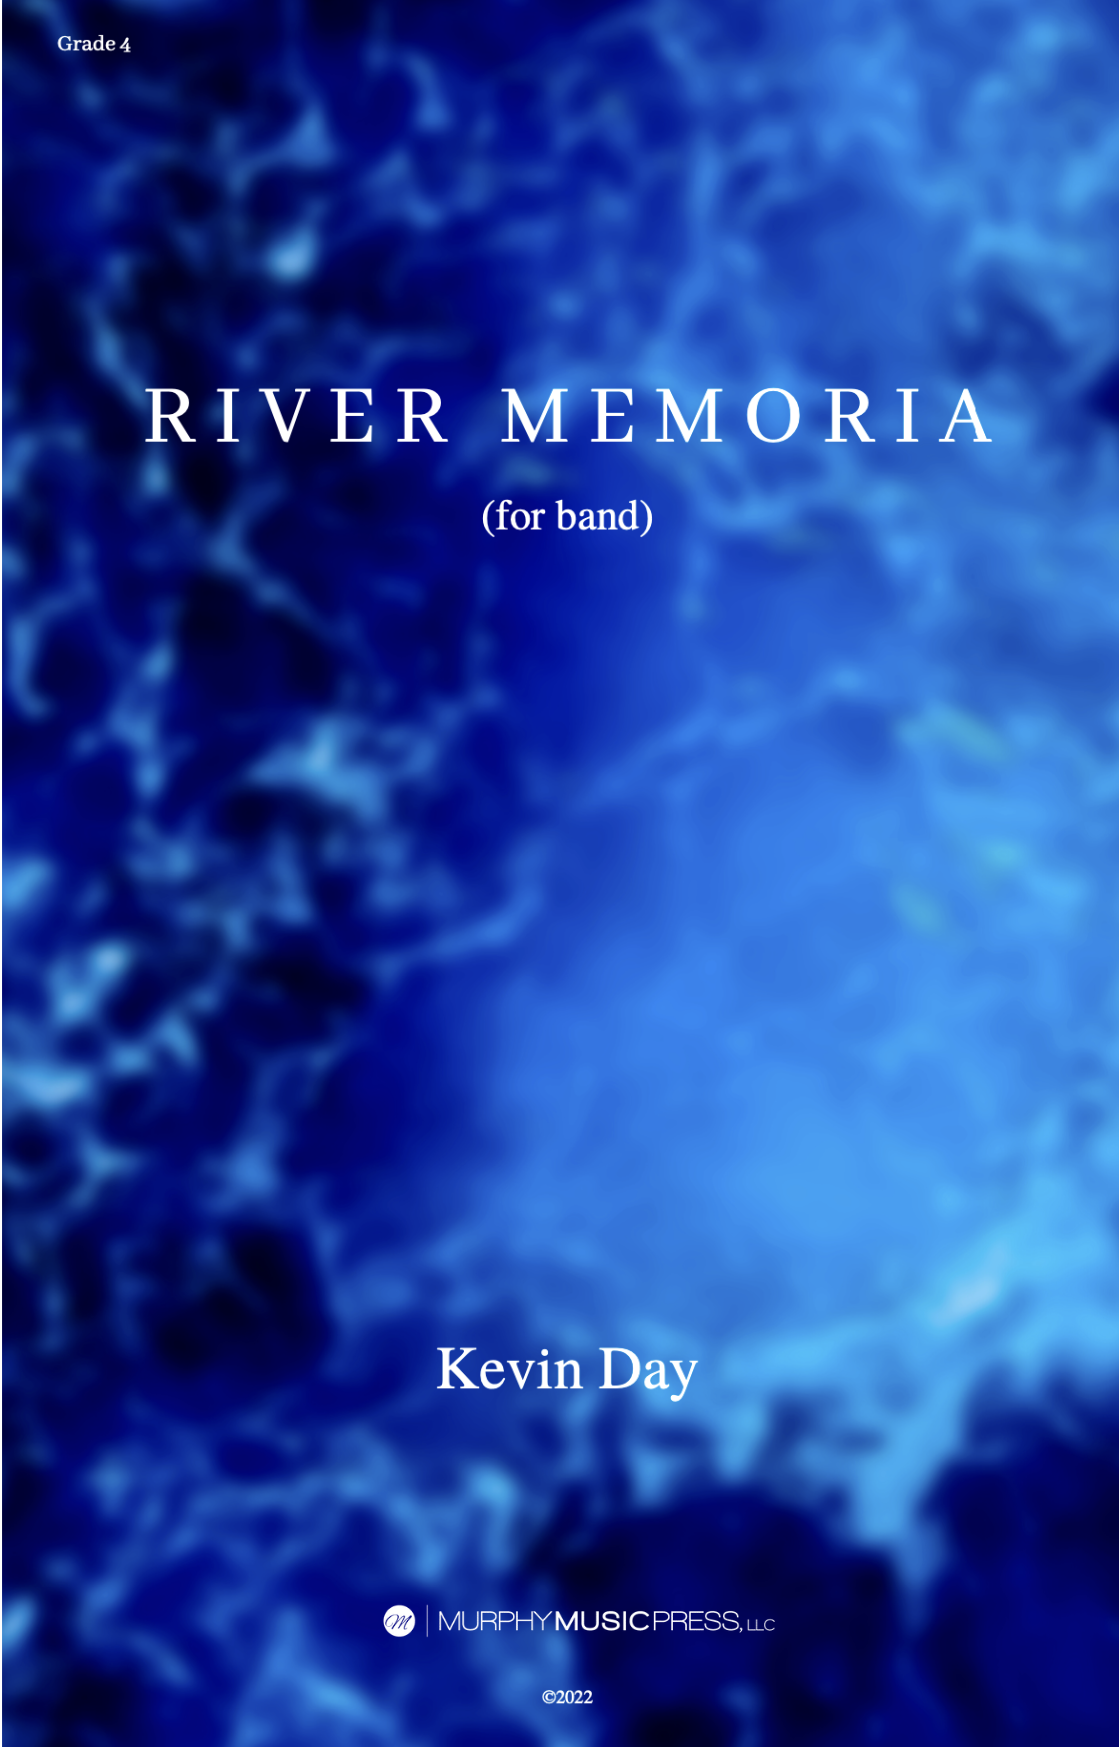 River Memoria by Kevin Day